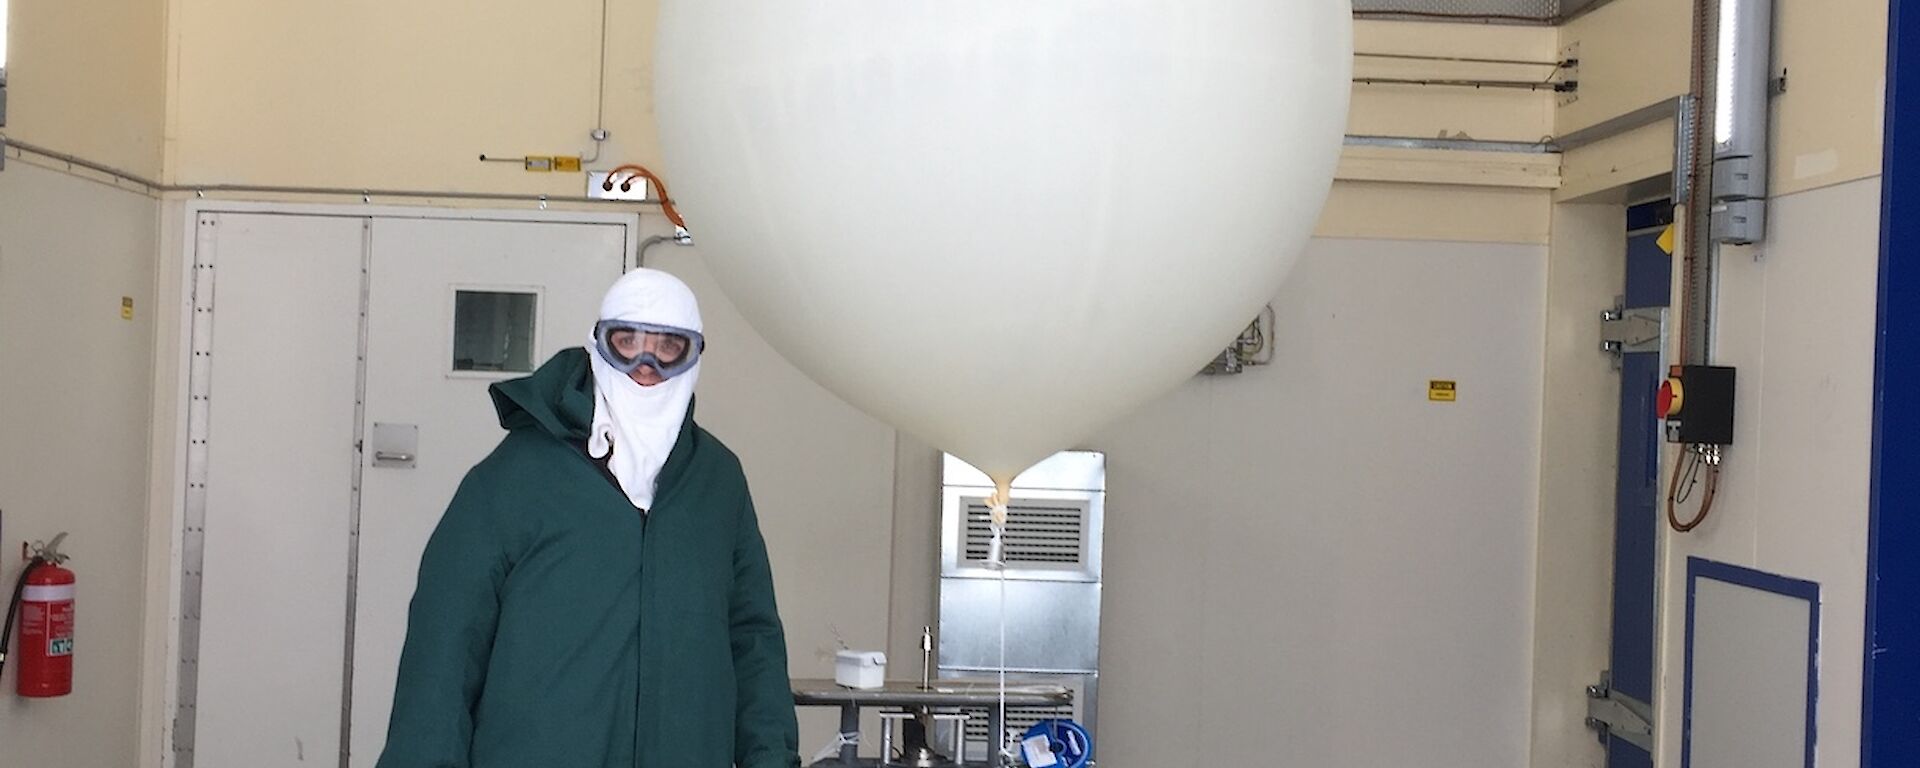 Even dressed in a green smock and head cover and goggles with an inflated weather balloon